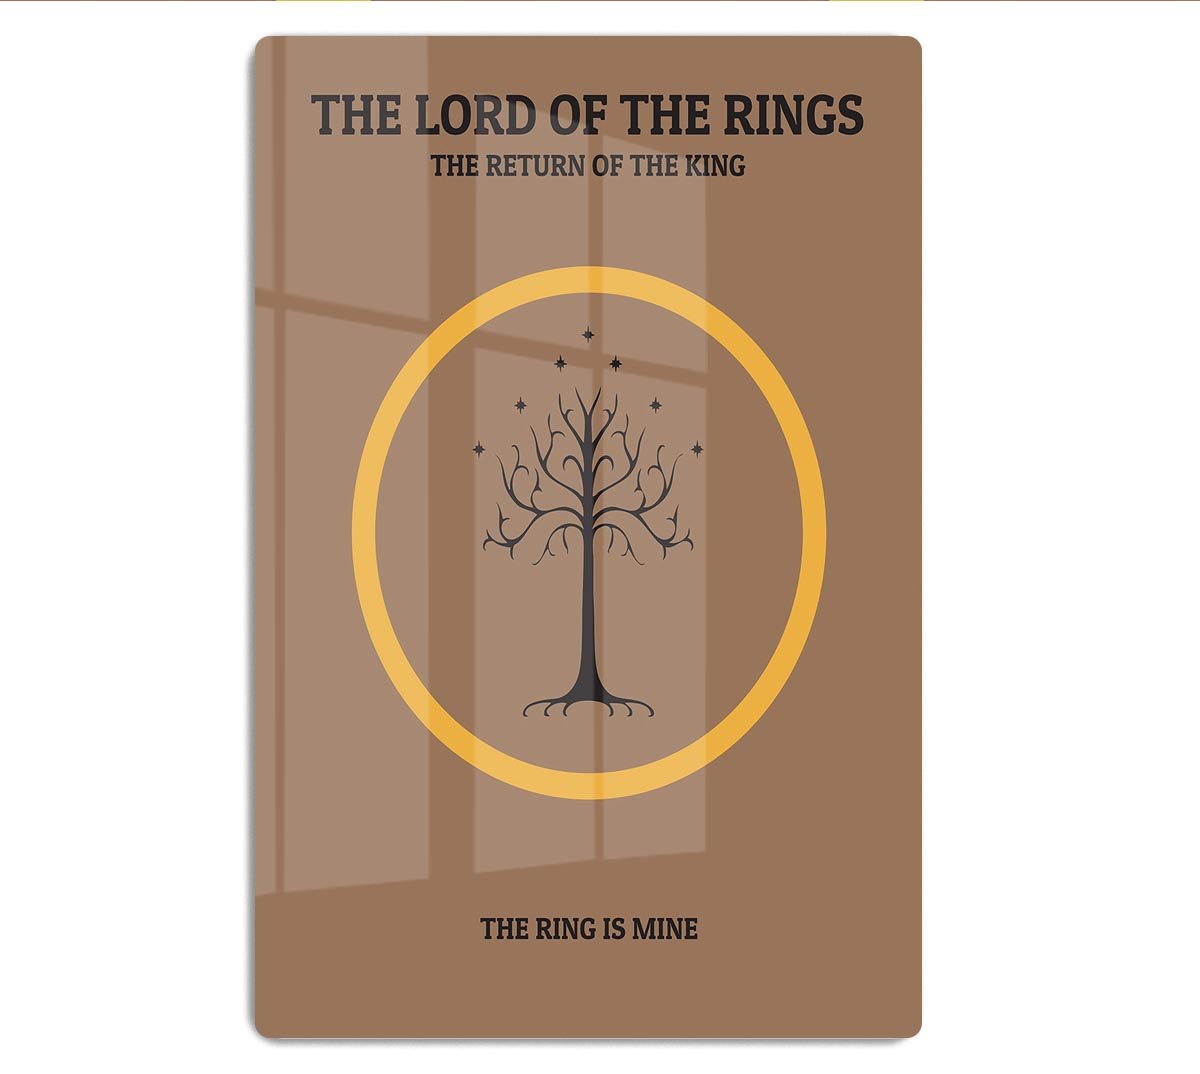 The Lord Of The Rings The Return Of The King Minimal Movie HD Metal Print